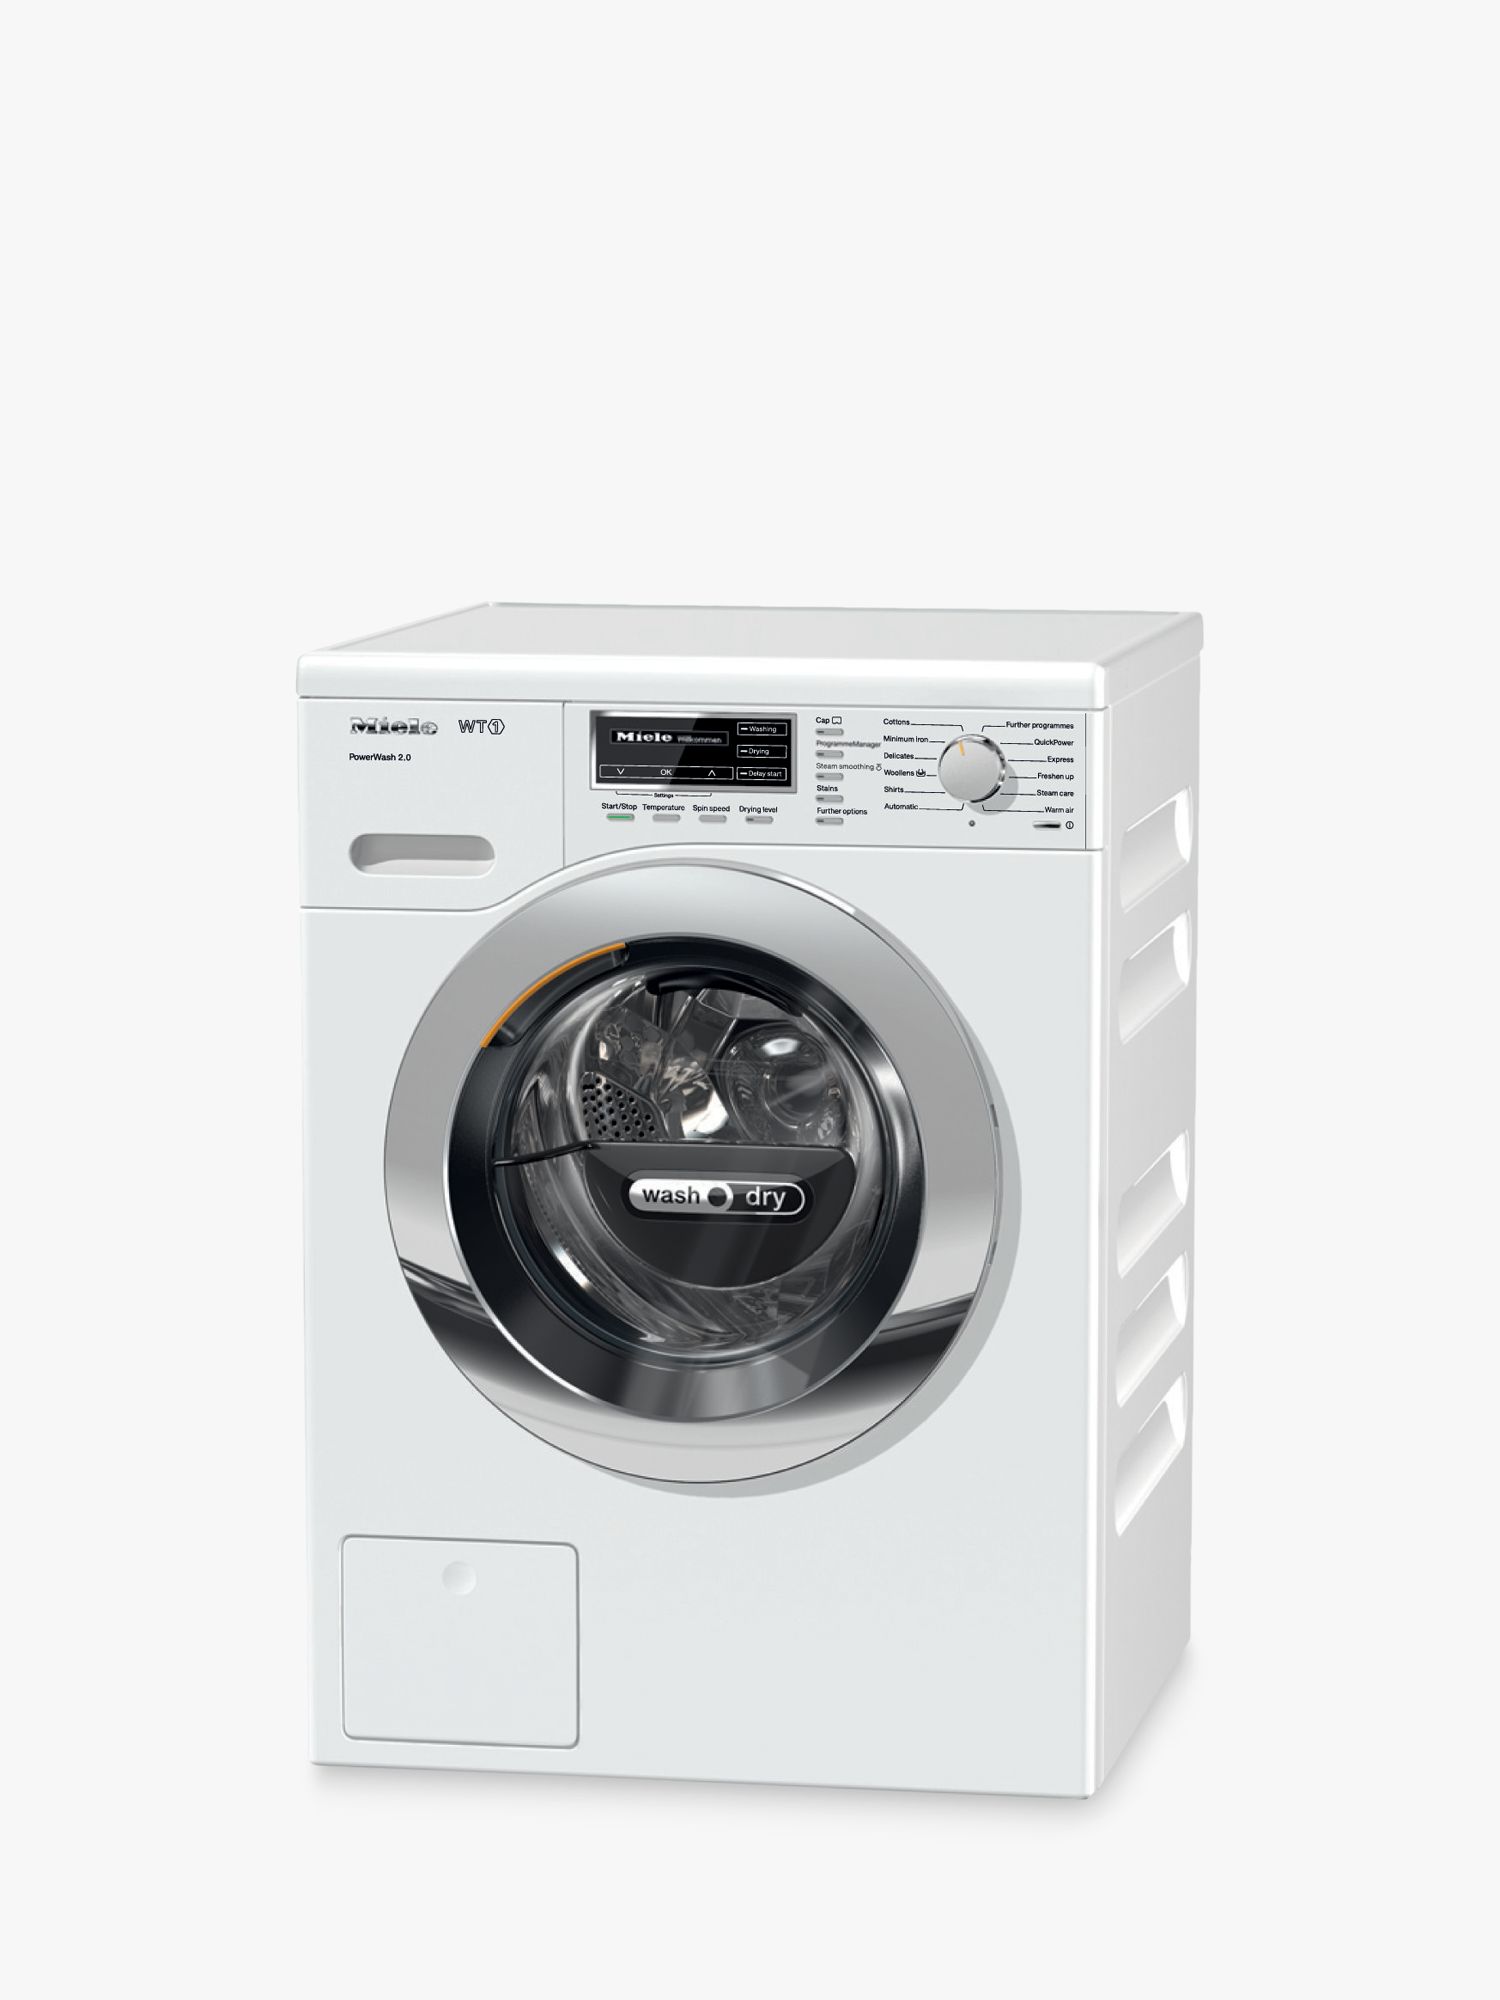 Miele WTF121WPM Washer Dryer, 7kg Wash/5kg Dry Load, A Energy Rating, 1600rpm Spin, Lotus White